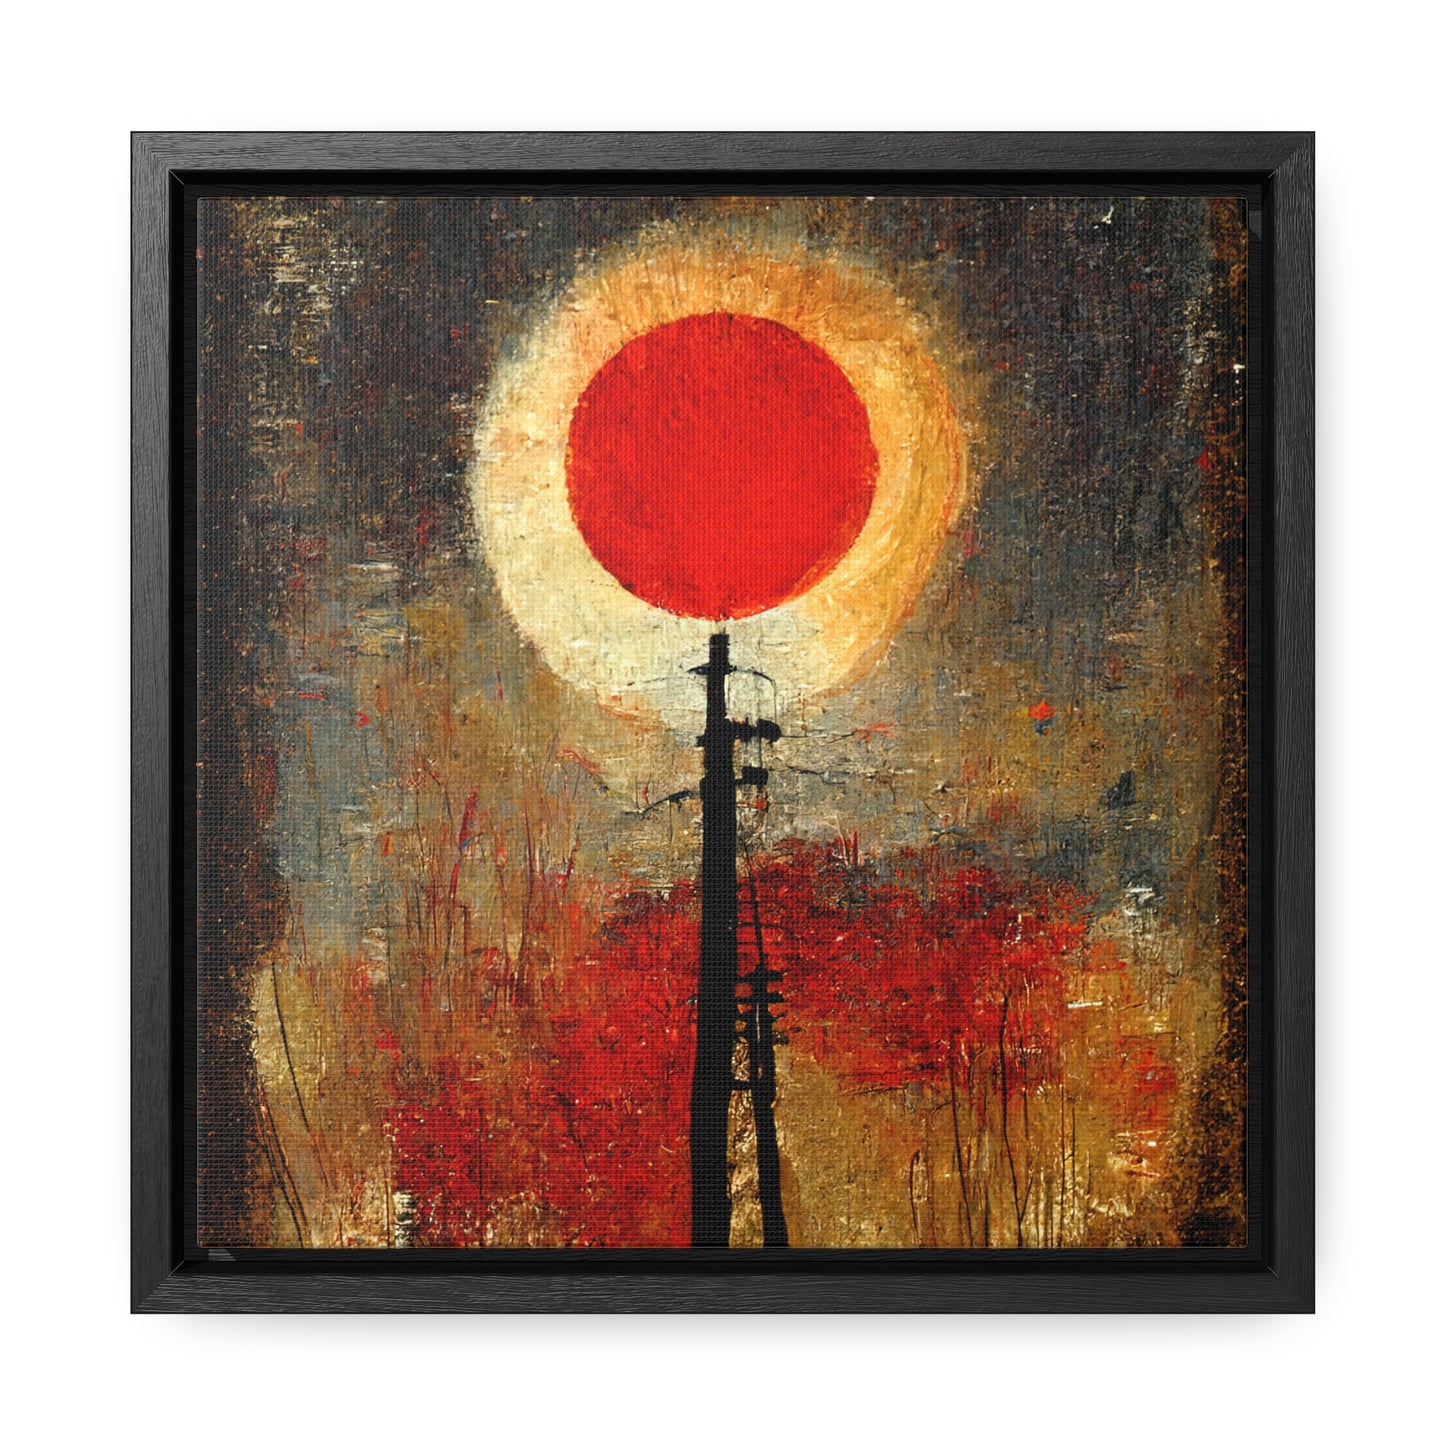 Land of the Sun 11, Valentinii, Gallery Canvas Wraps, Square Frame